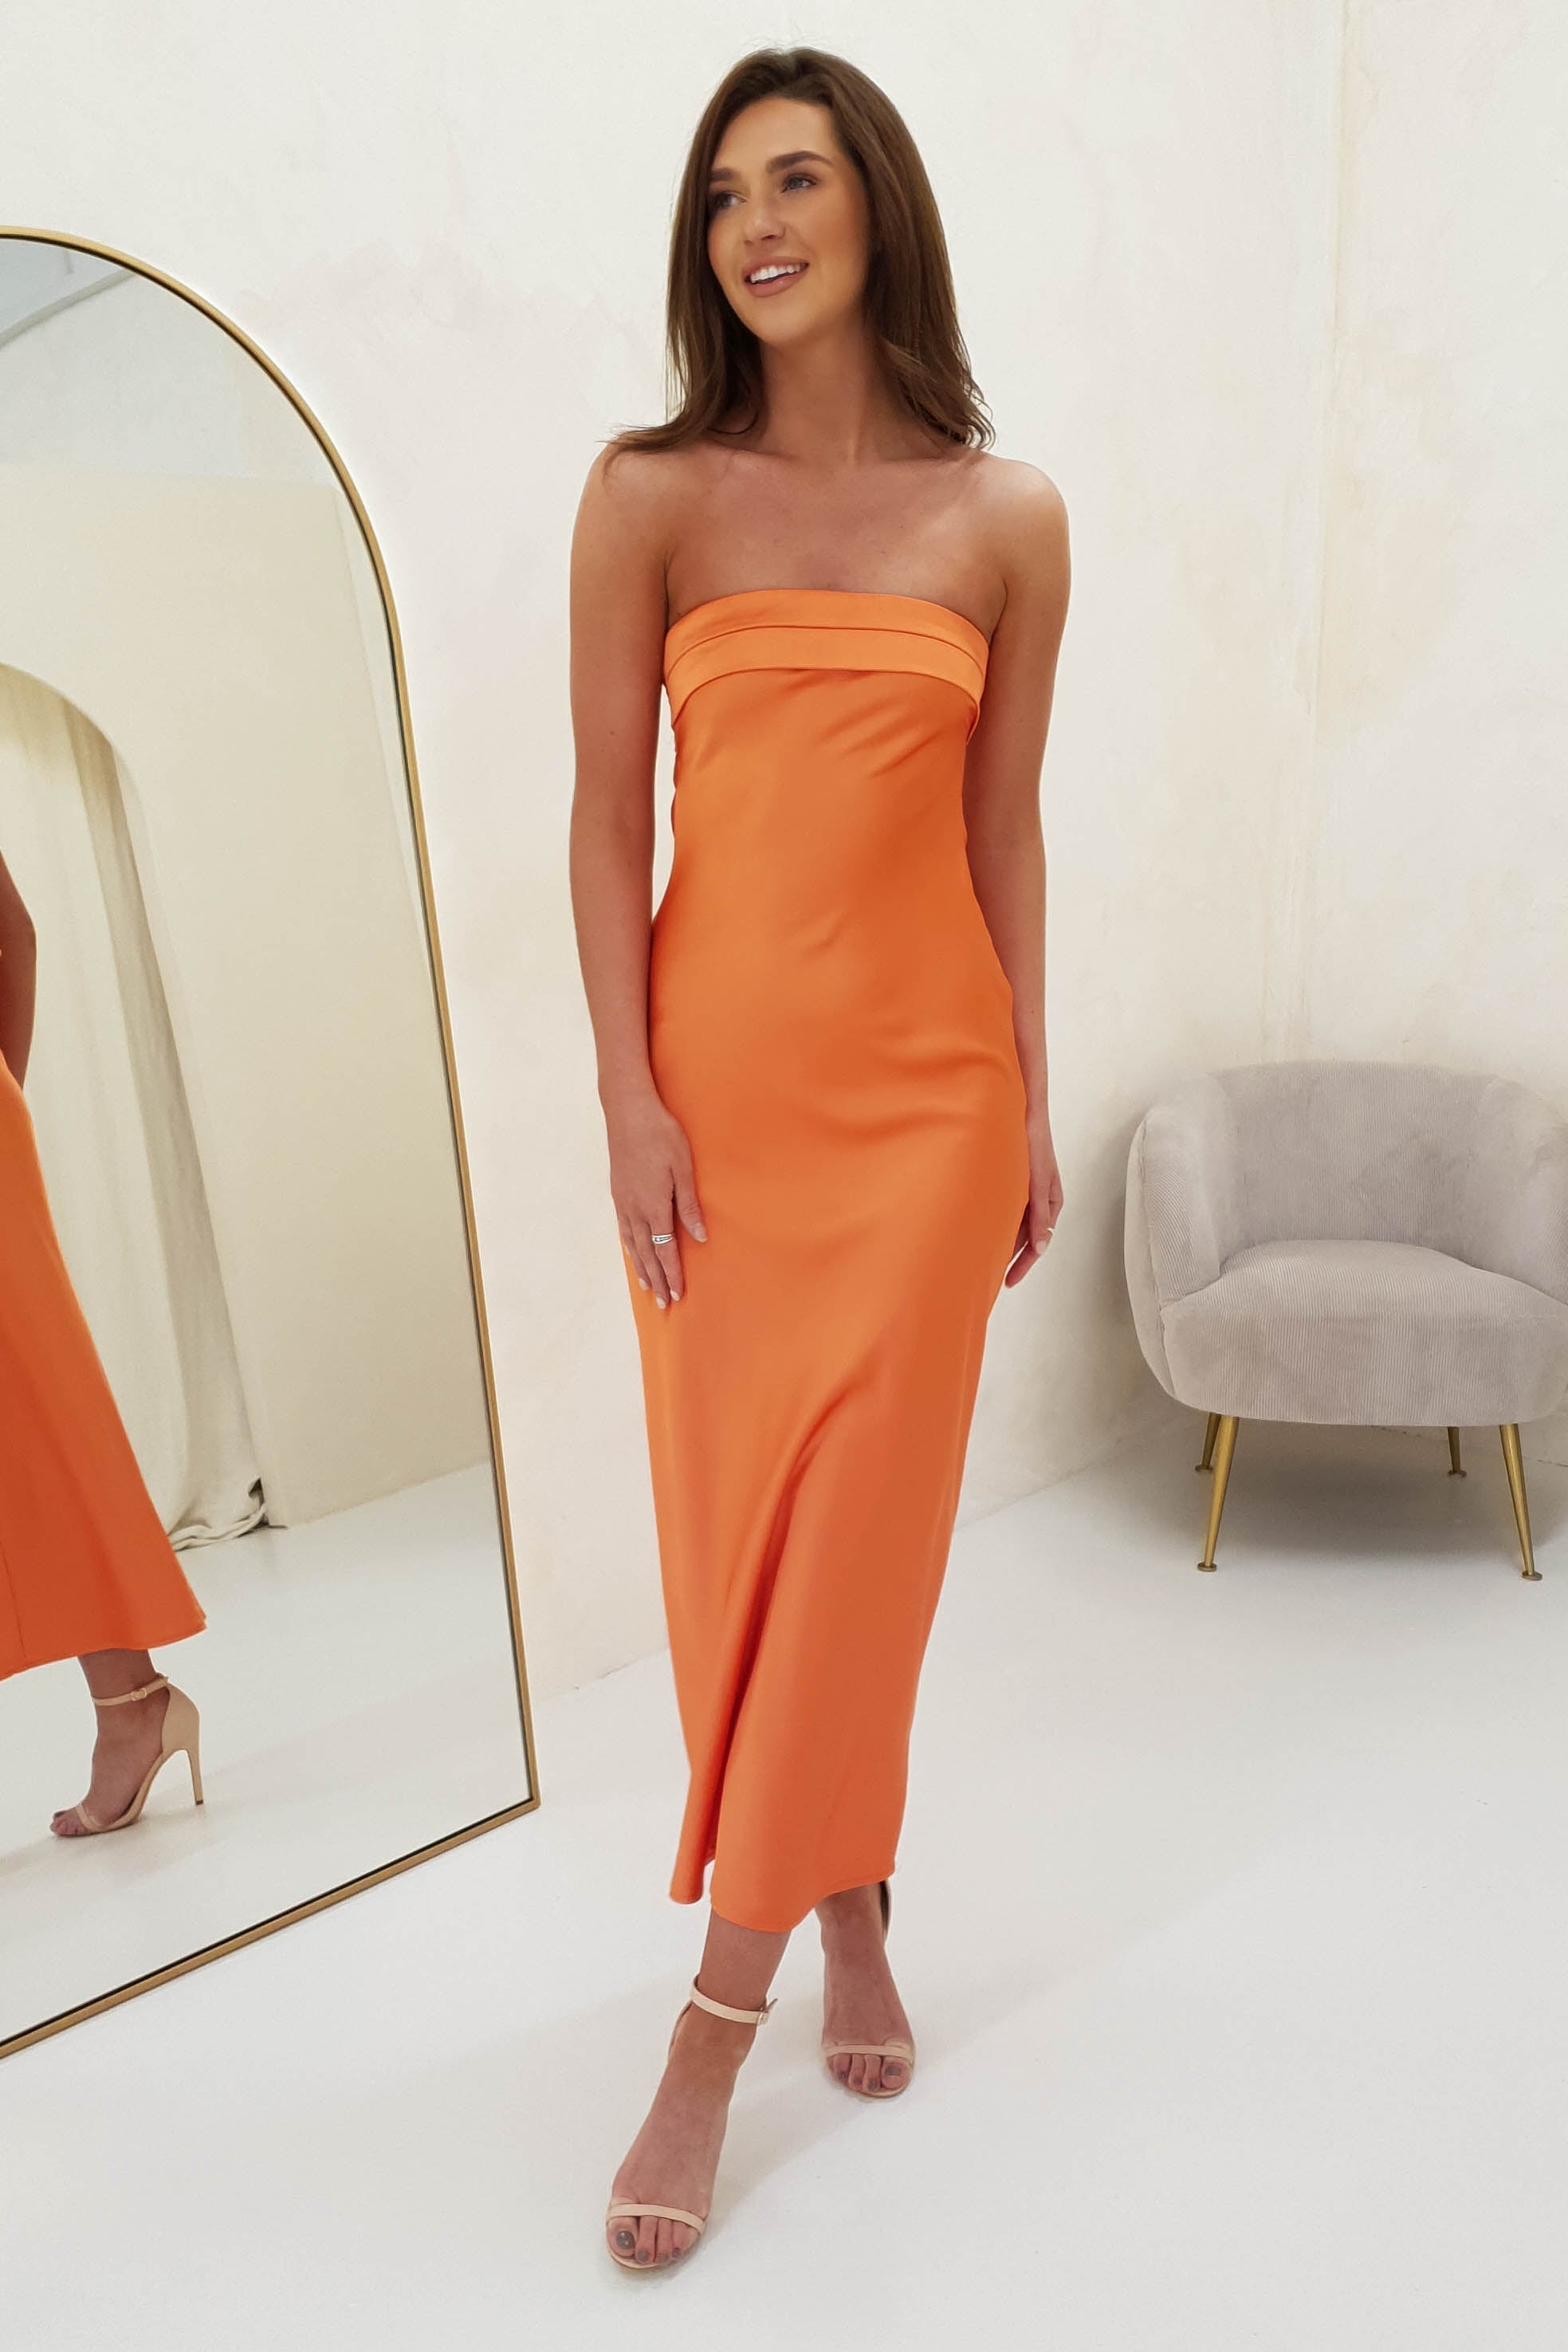 1a-whitney-in-orange-not-complete-new-code-dresses-49695577899349.jpg